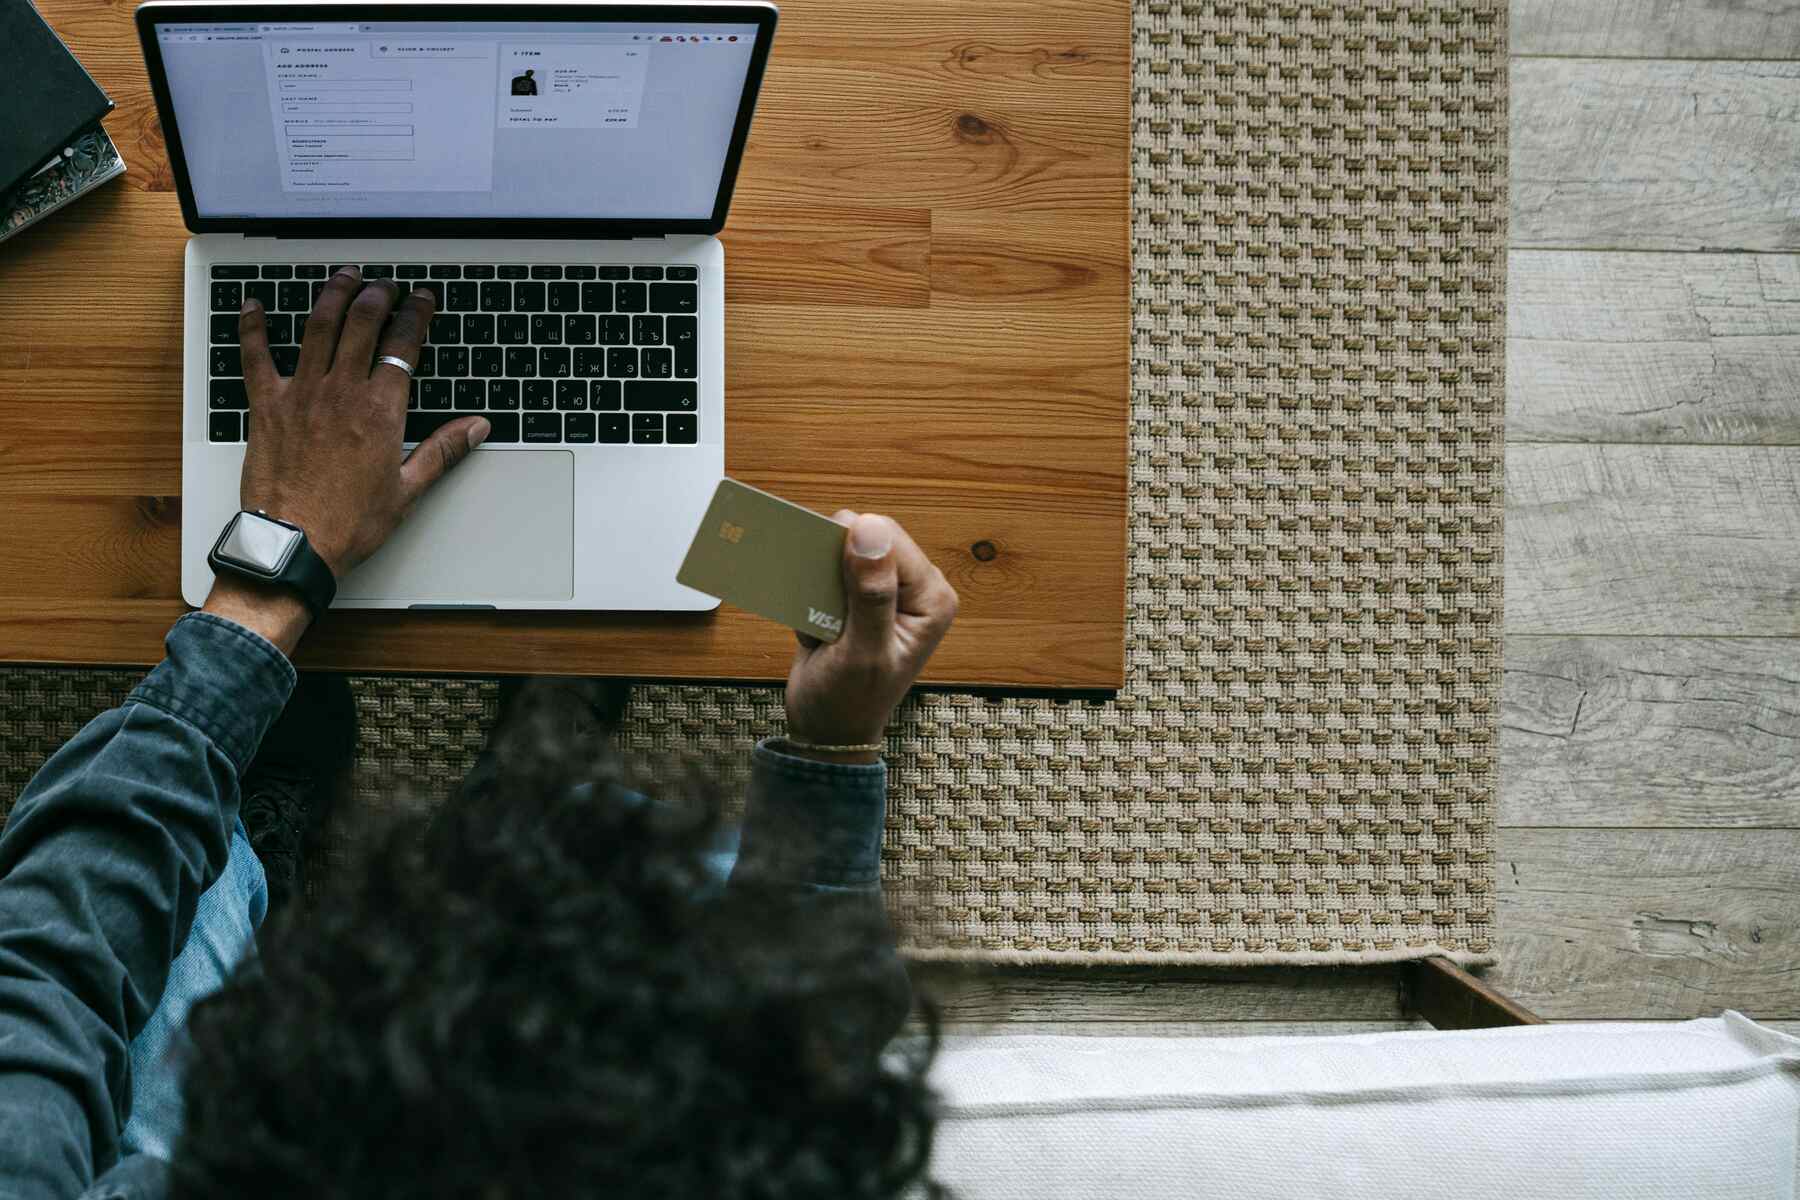 A man typing on his laptop while holding a credit card